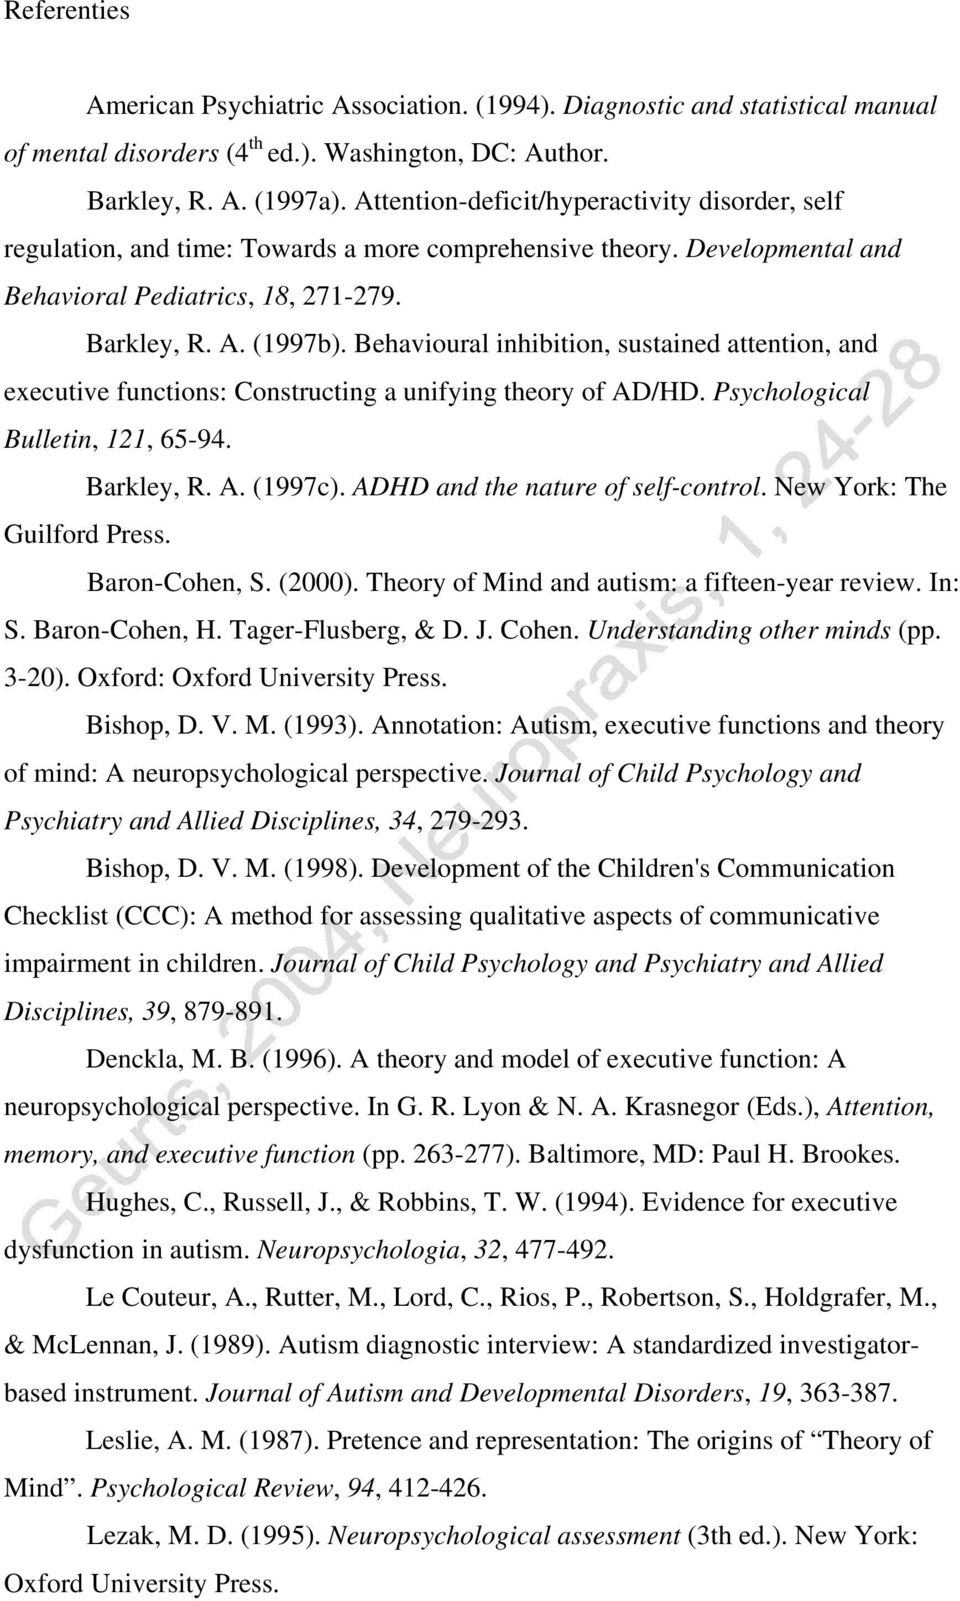 Behavioural inhibition, sustained attention, and executive functions: Constructing a unifying theory of AD/HD. Psychological Bulletin, 121, 65-94. Barkley, R. A. (1997c).